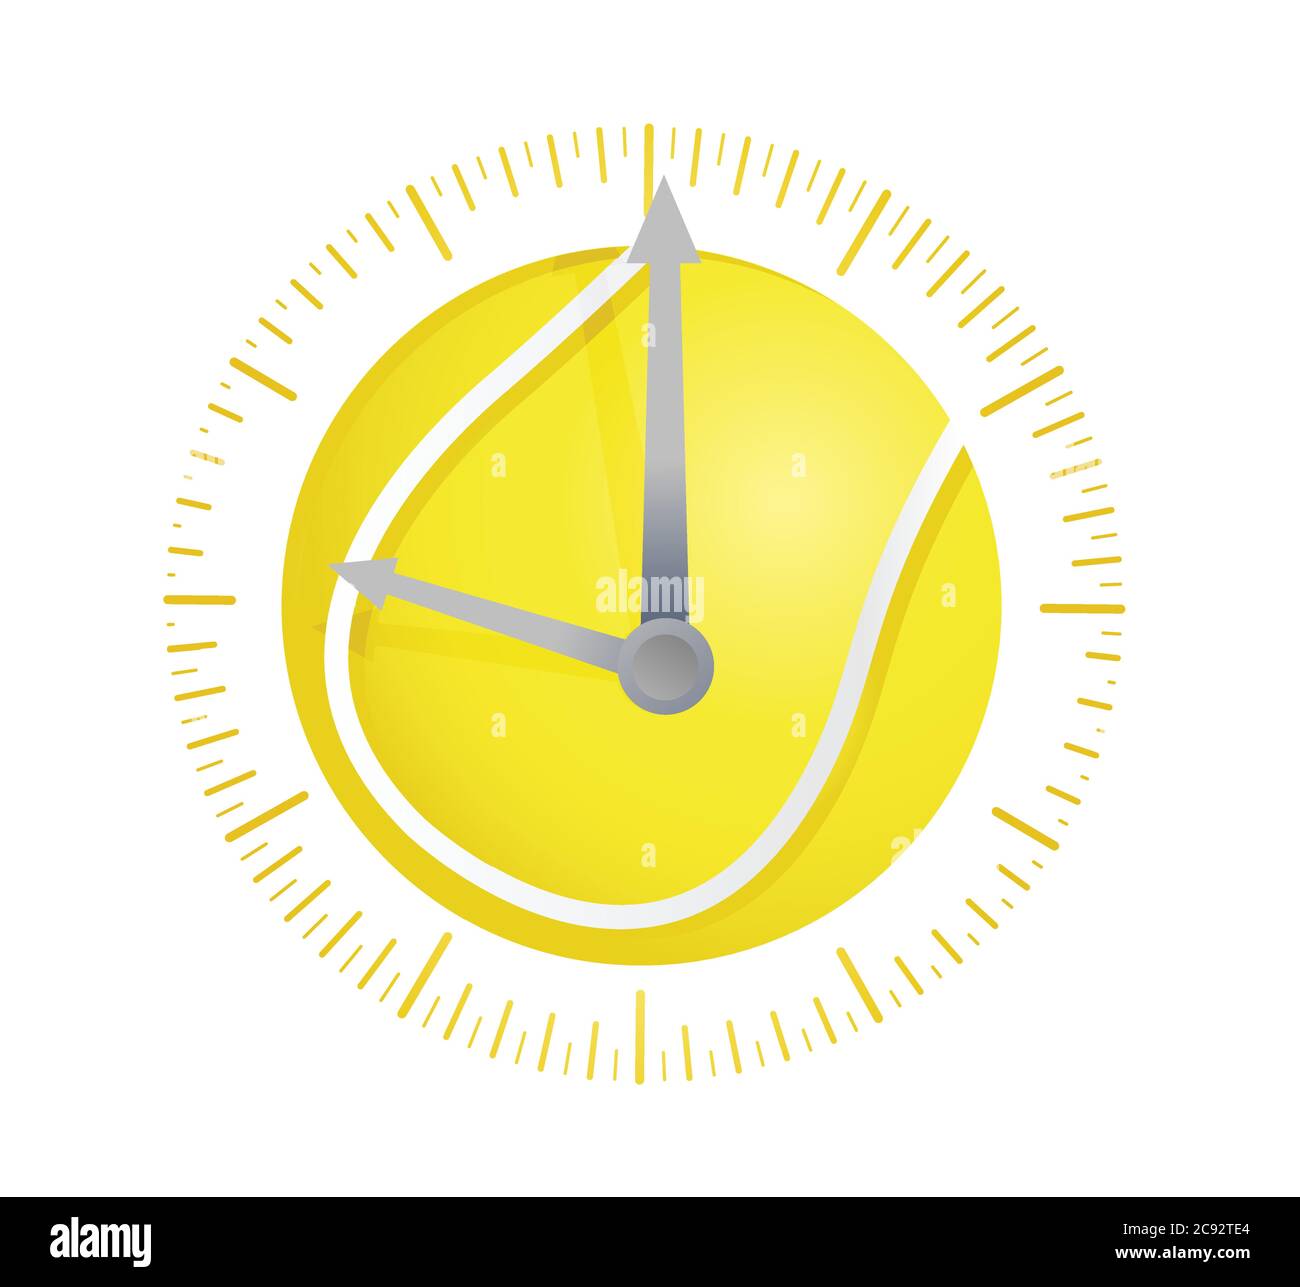 Tennis ball watch illustration design over a white background Stock Vector